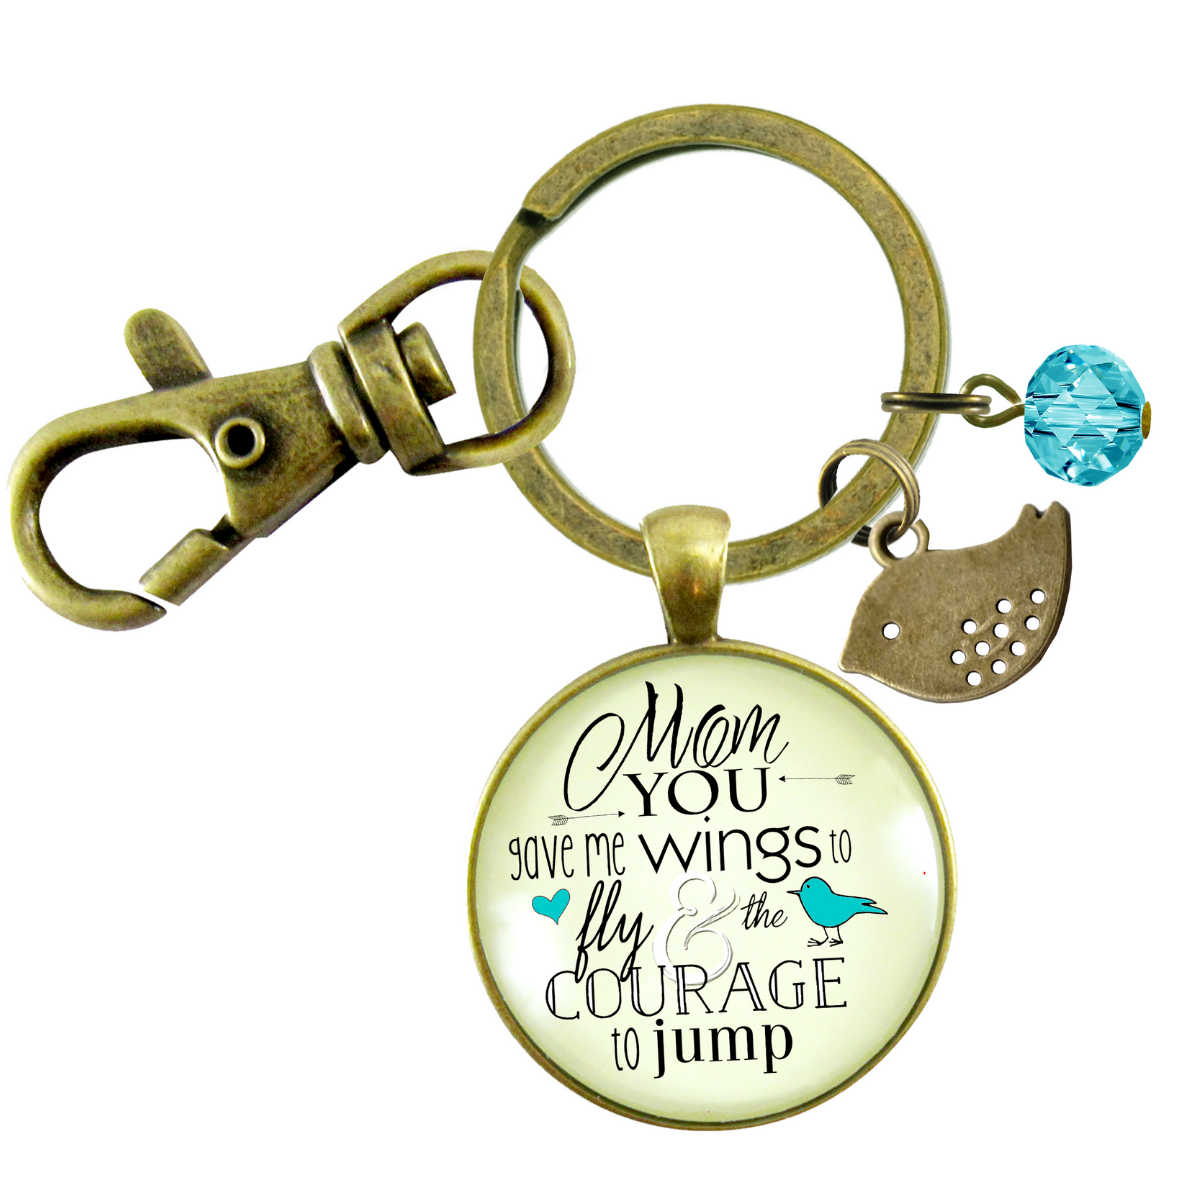 Thanks Mom Keychain You Gave Me Wings Courage Boho Meaningful Jewelry From Daughter Bird - Gutsy Goodness Handmade Jewelry;Thanks Mom Keychain You Gave Me Wings Courage Boho Meaningful Jewelry From Daughter Bird - Gutsy Goodness Handmade Jewelry Gifts